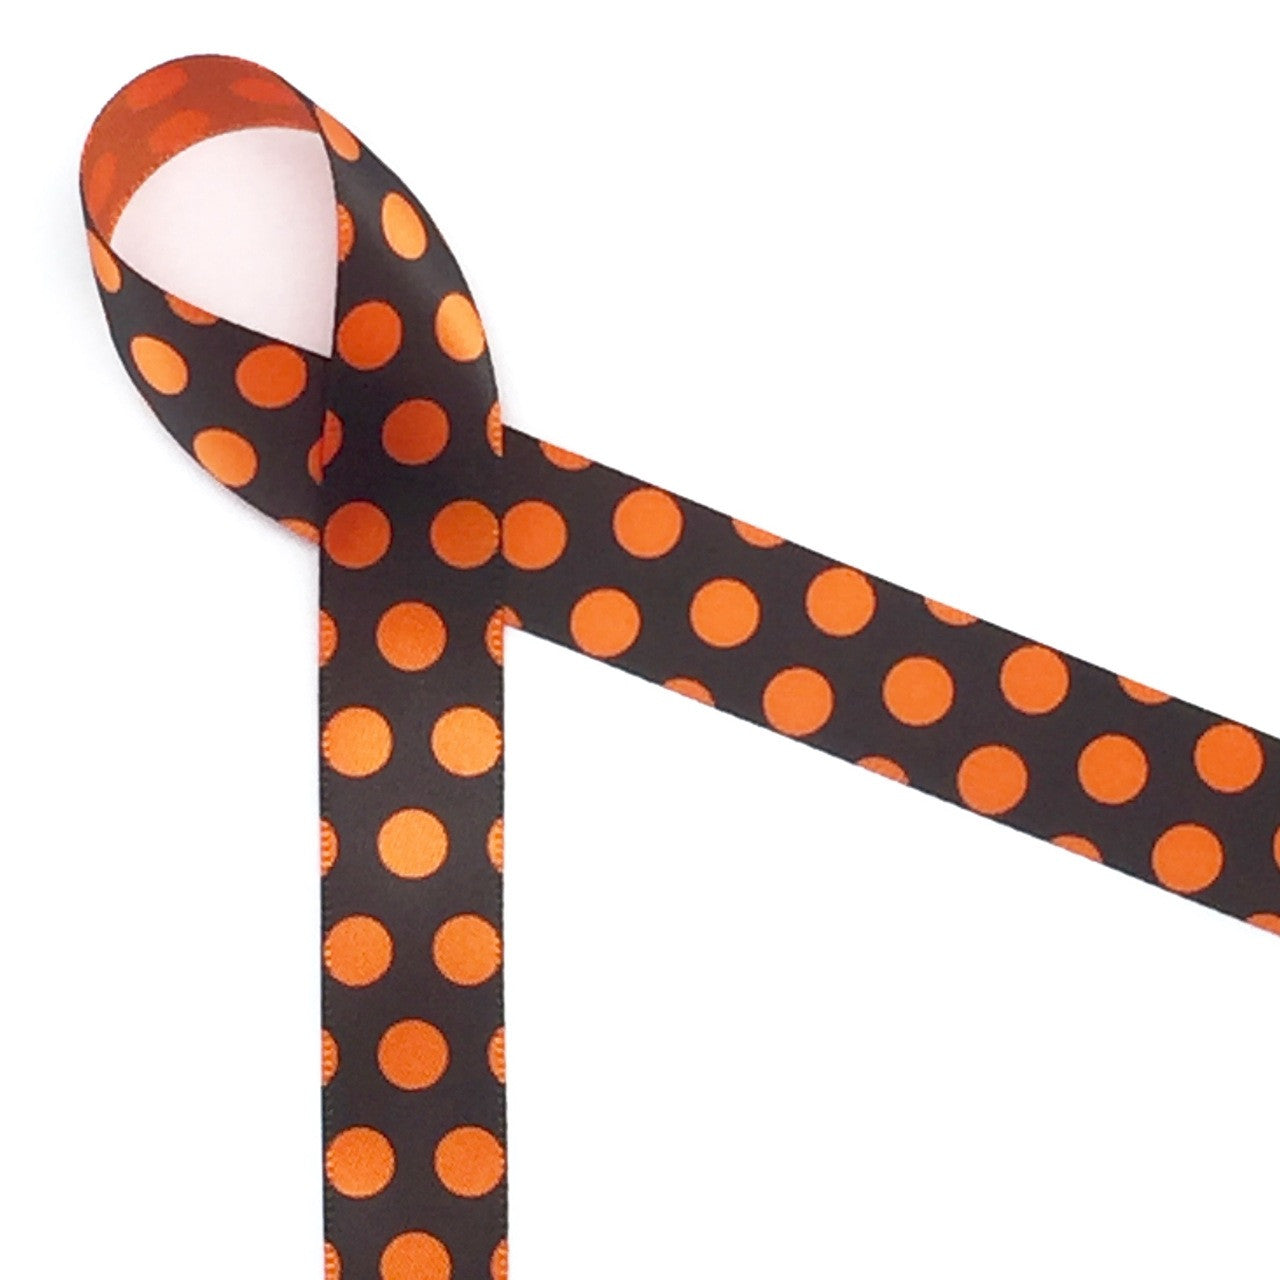 Nothing says Halloween like black and orange dots! Orange polka dots on a black background printed on 5/8" orange satin ribbon is a Halloween tradition. This Halloween classic design is ideal for party decor, party favors, gift wrap, gift baskets, treat bags, candy shops, bakeries, cookies and cake pops! This is a great design for Halloween crafts, wreaths, sewing and quilting projects. All our ribbon is designed and printed in the USA